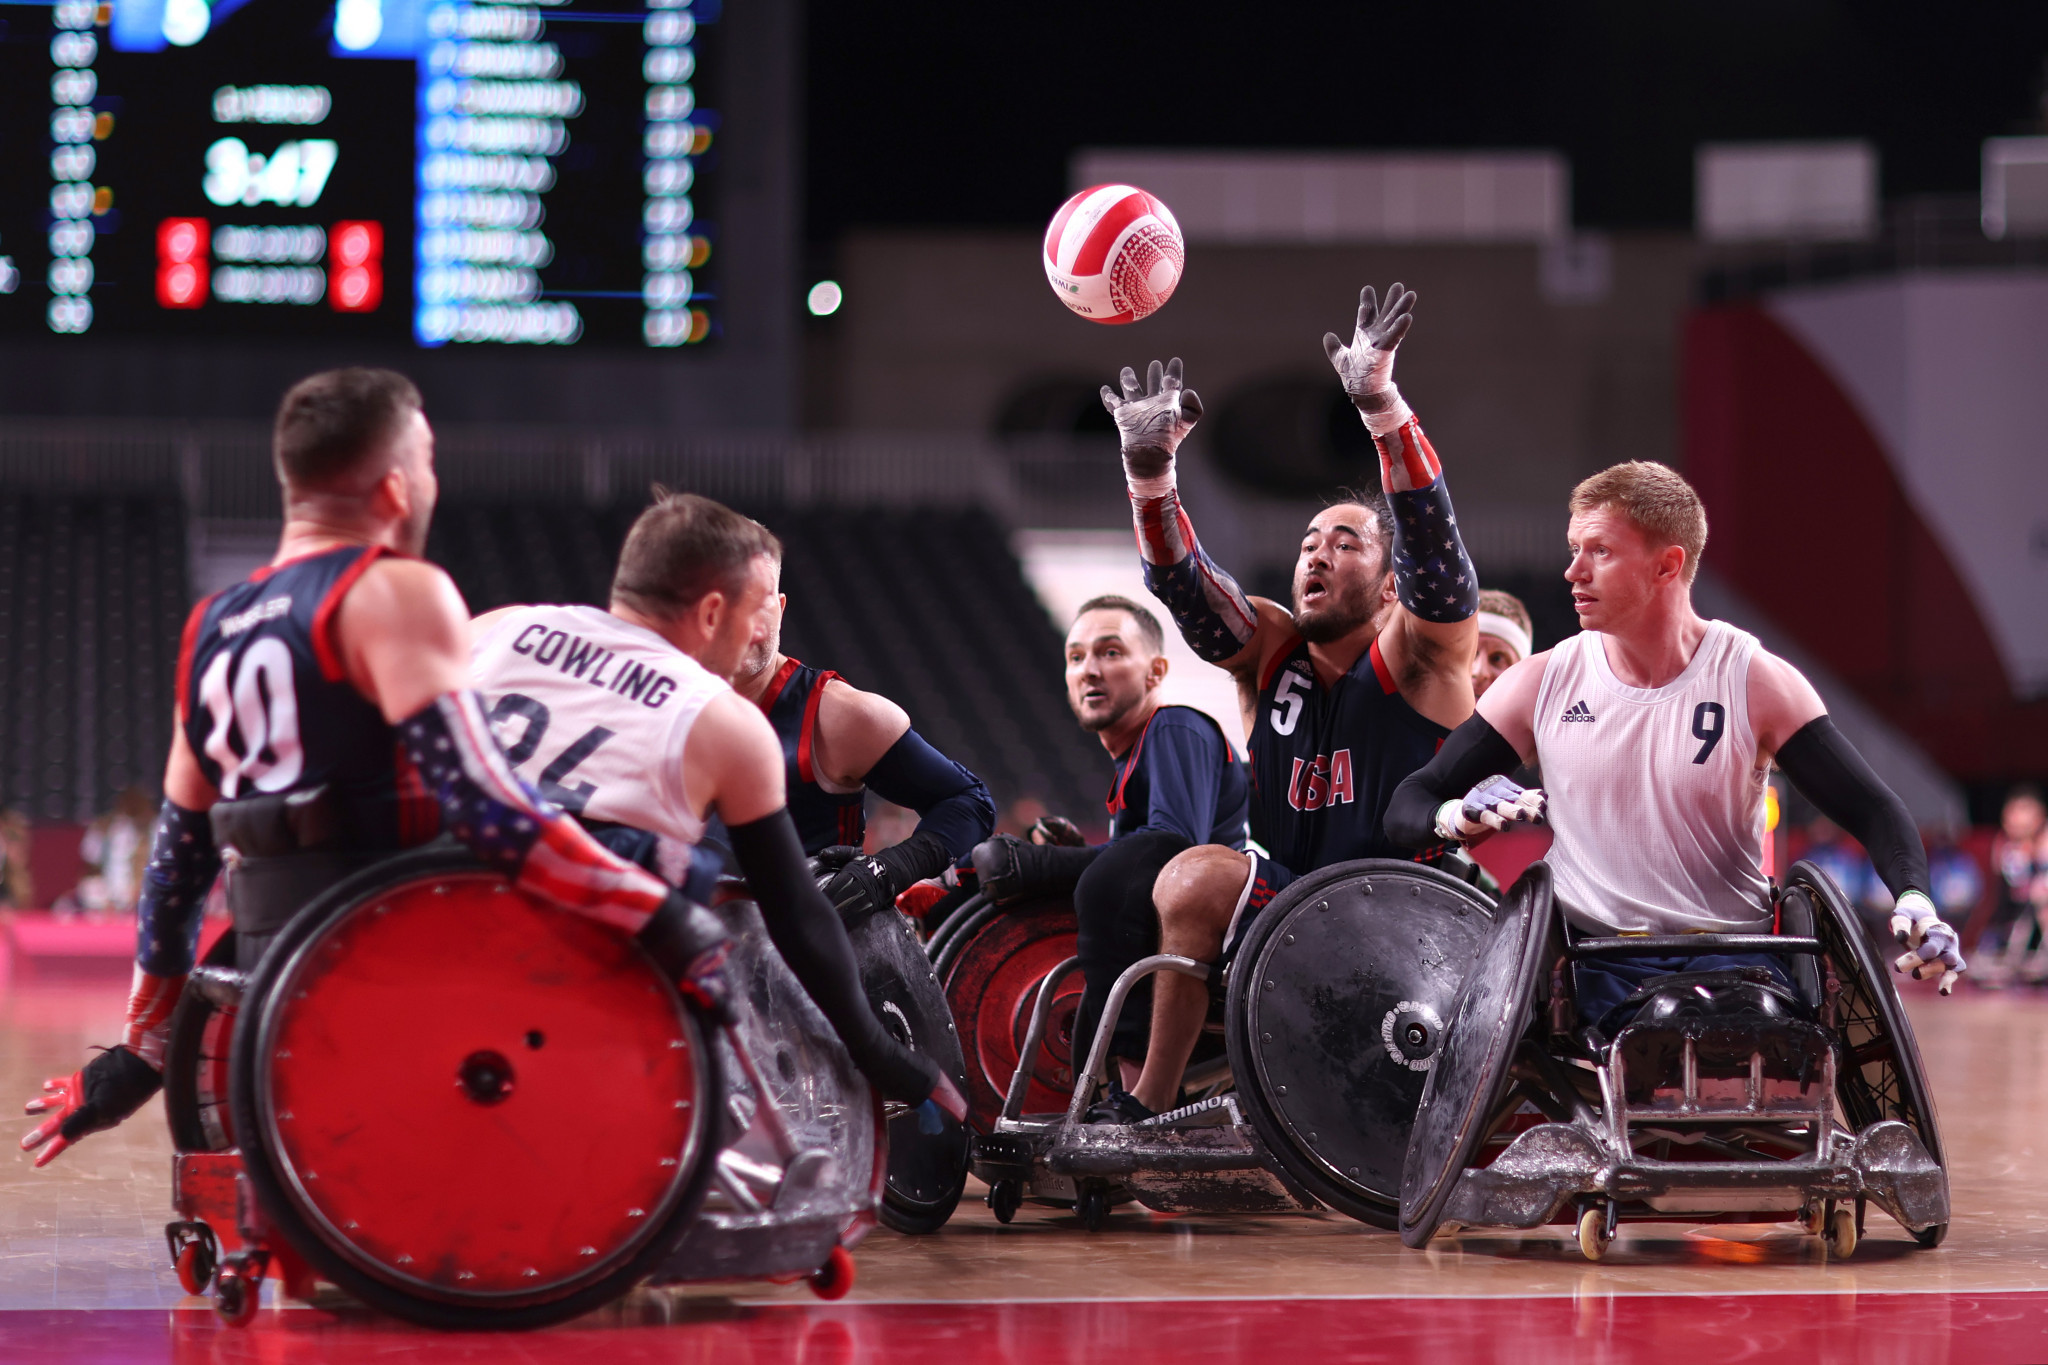 Tokyo 2020 finalists drawn in same group at Wheelchair Rugby World Championship